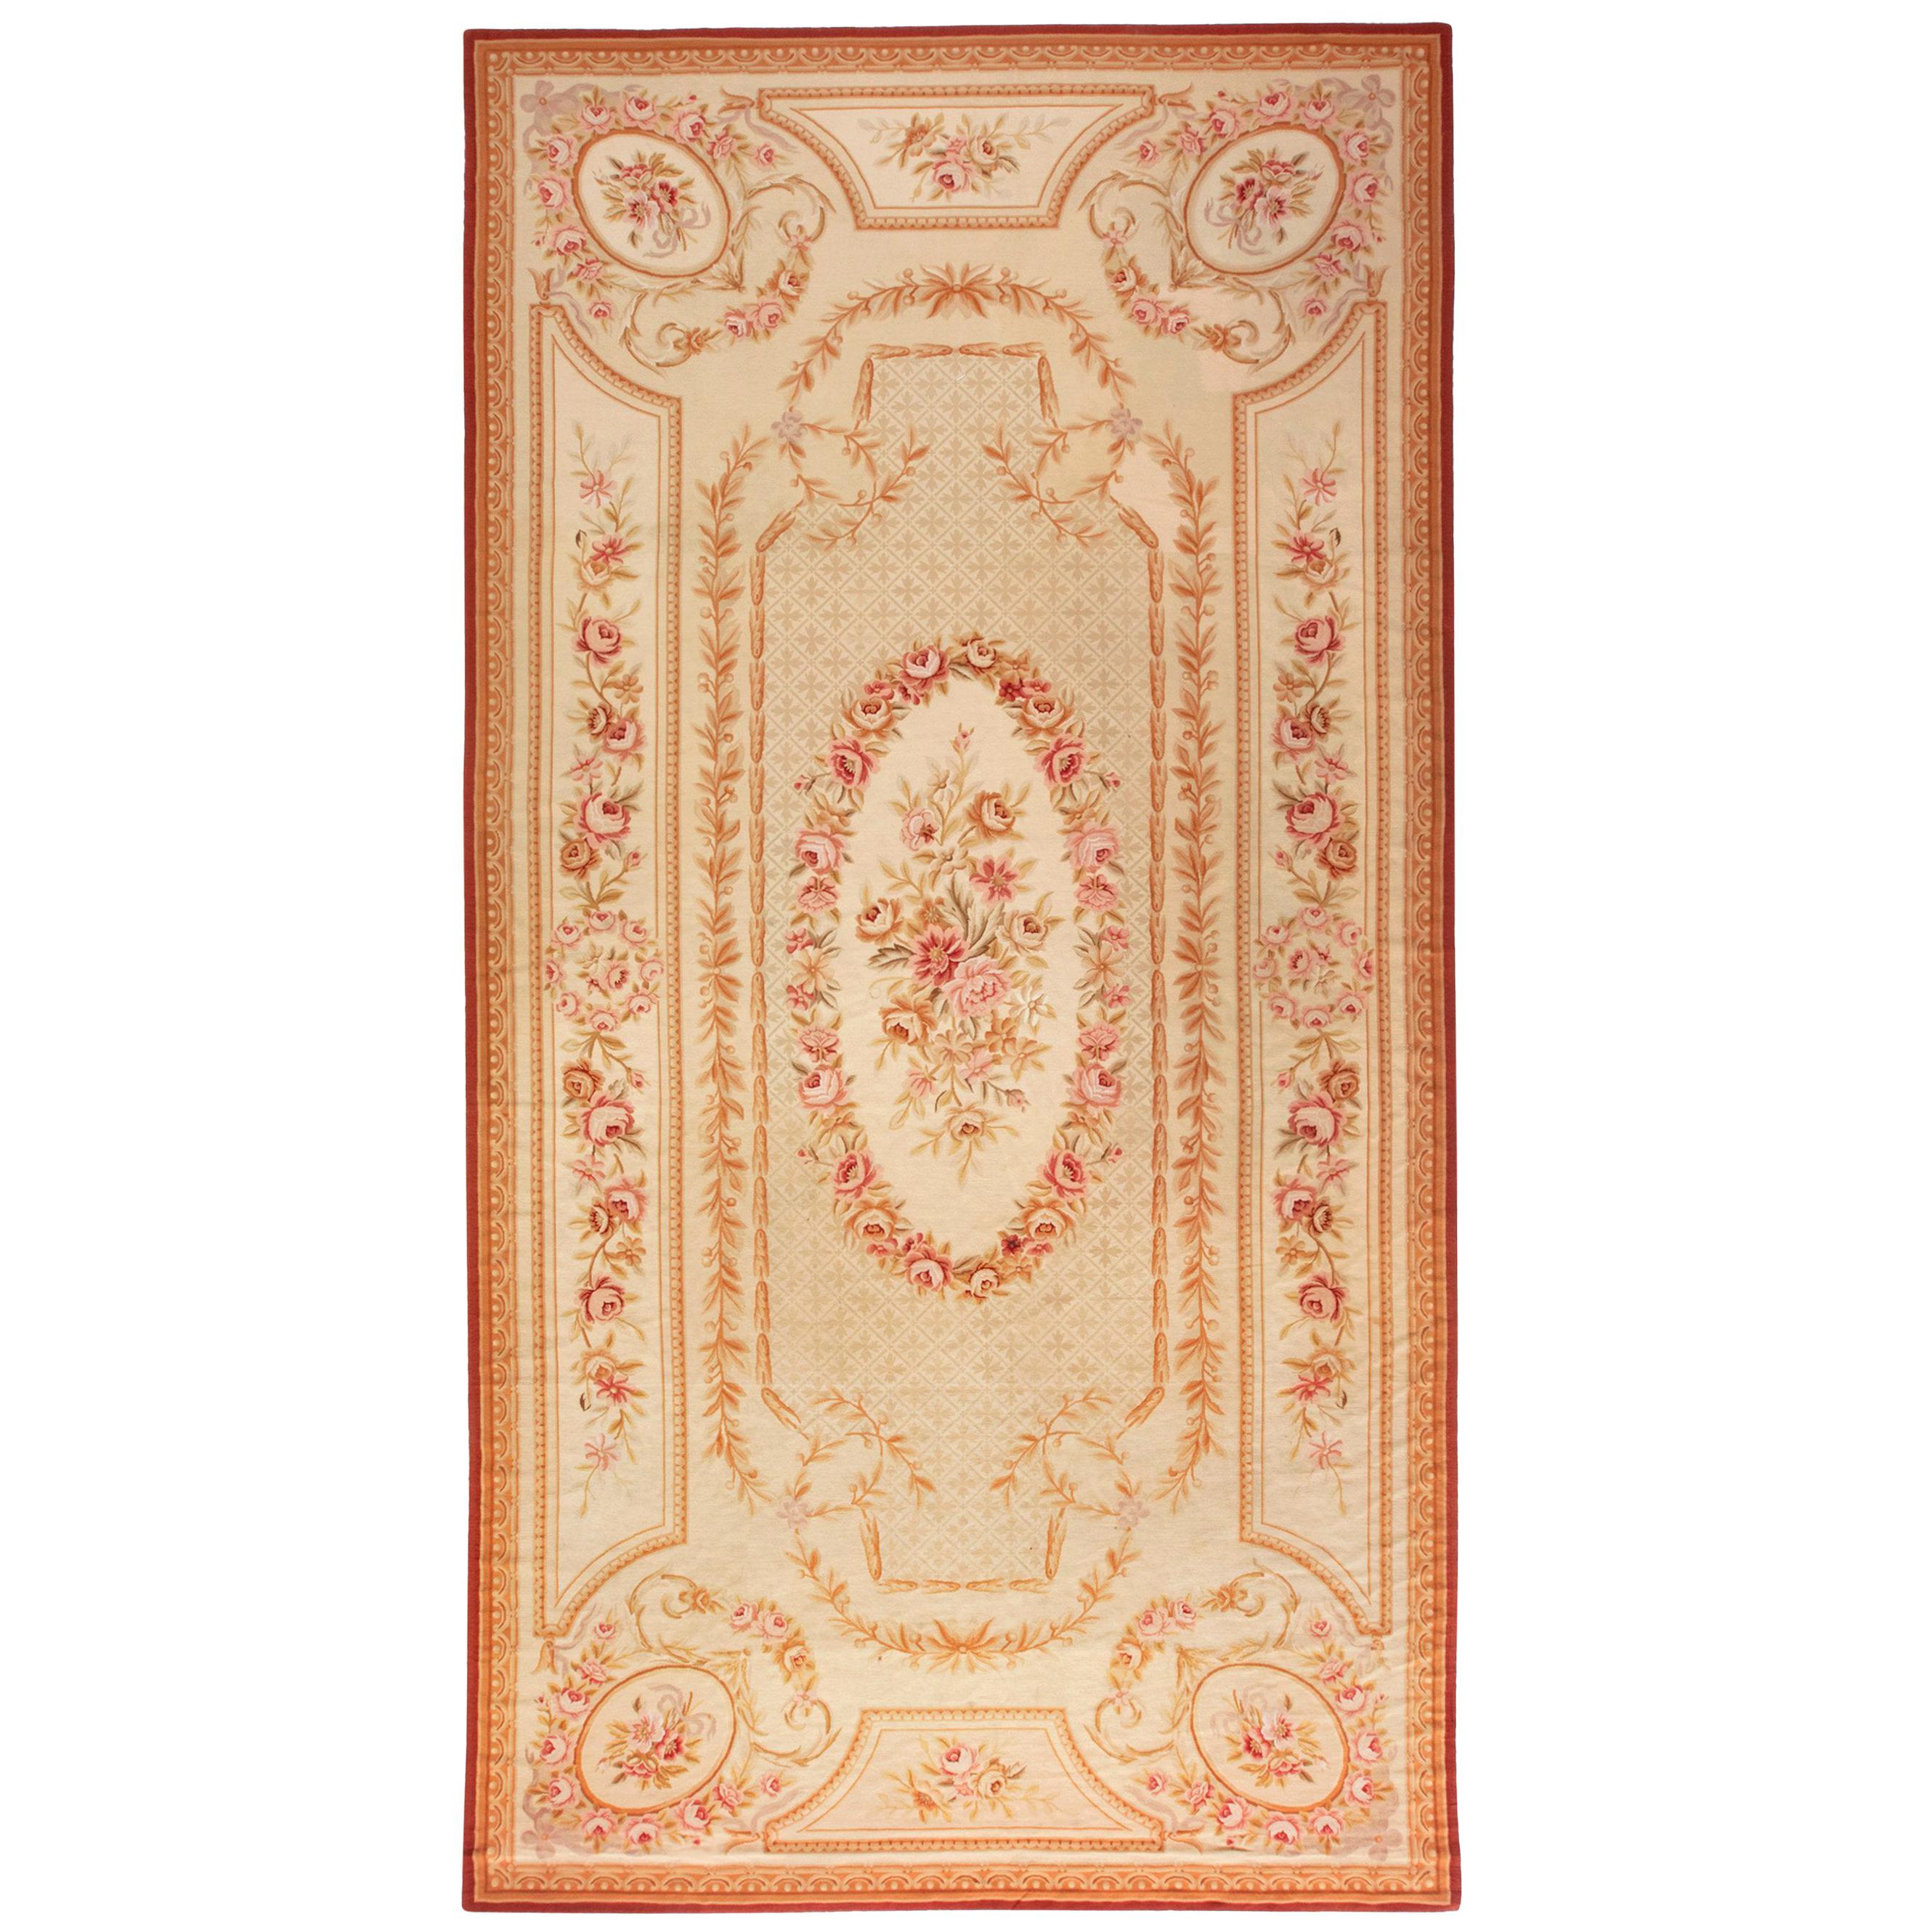 Palatial 20th Century Aubusson Style Rug